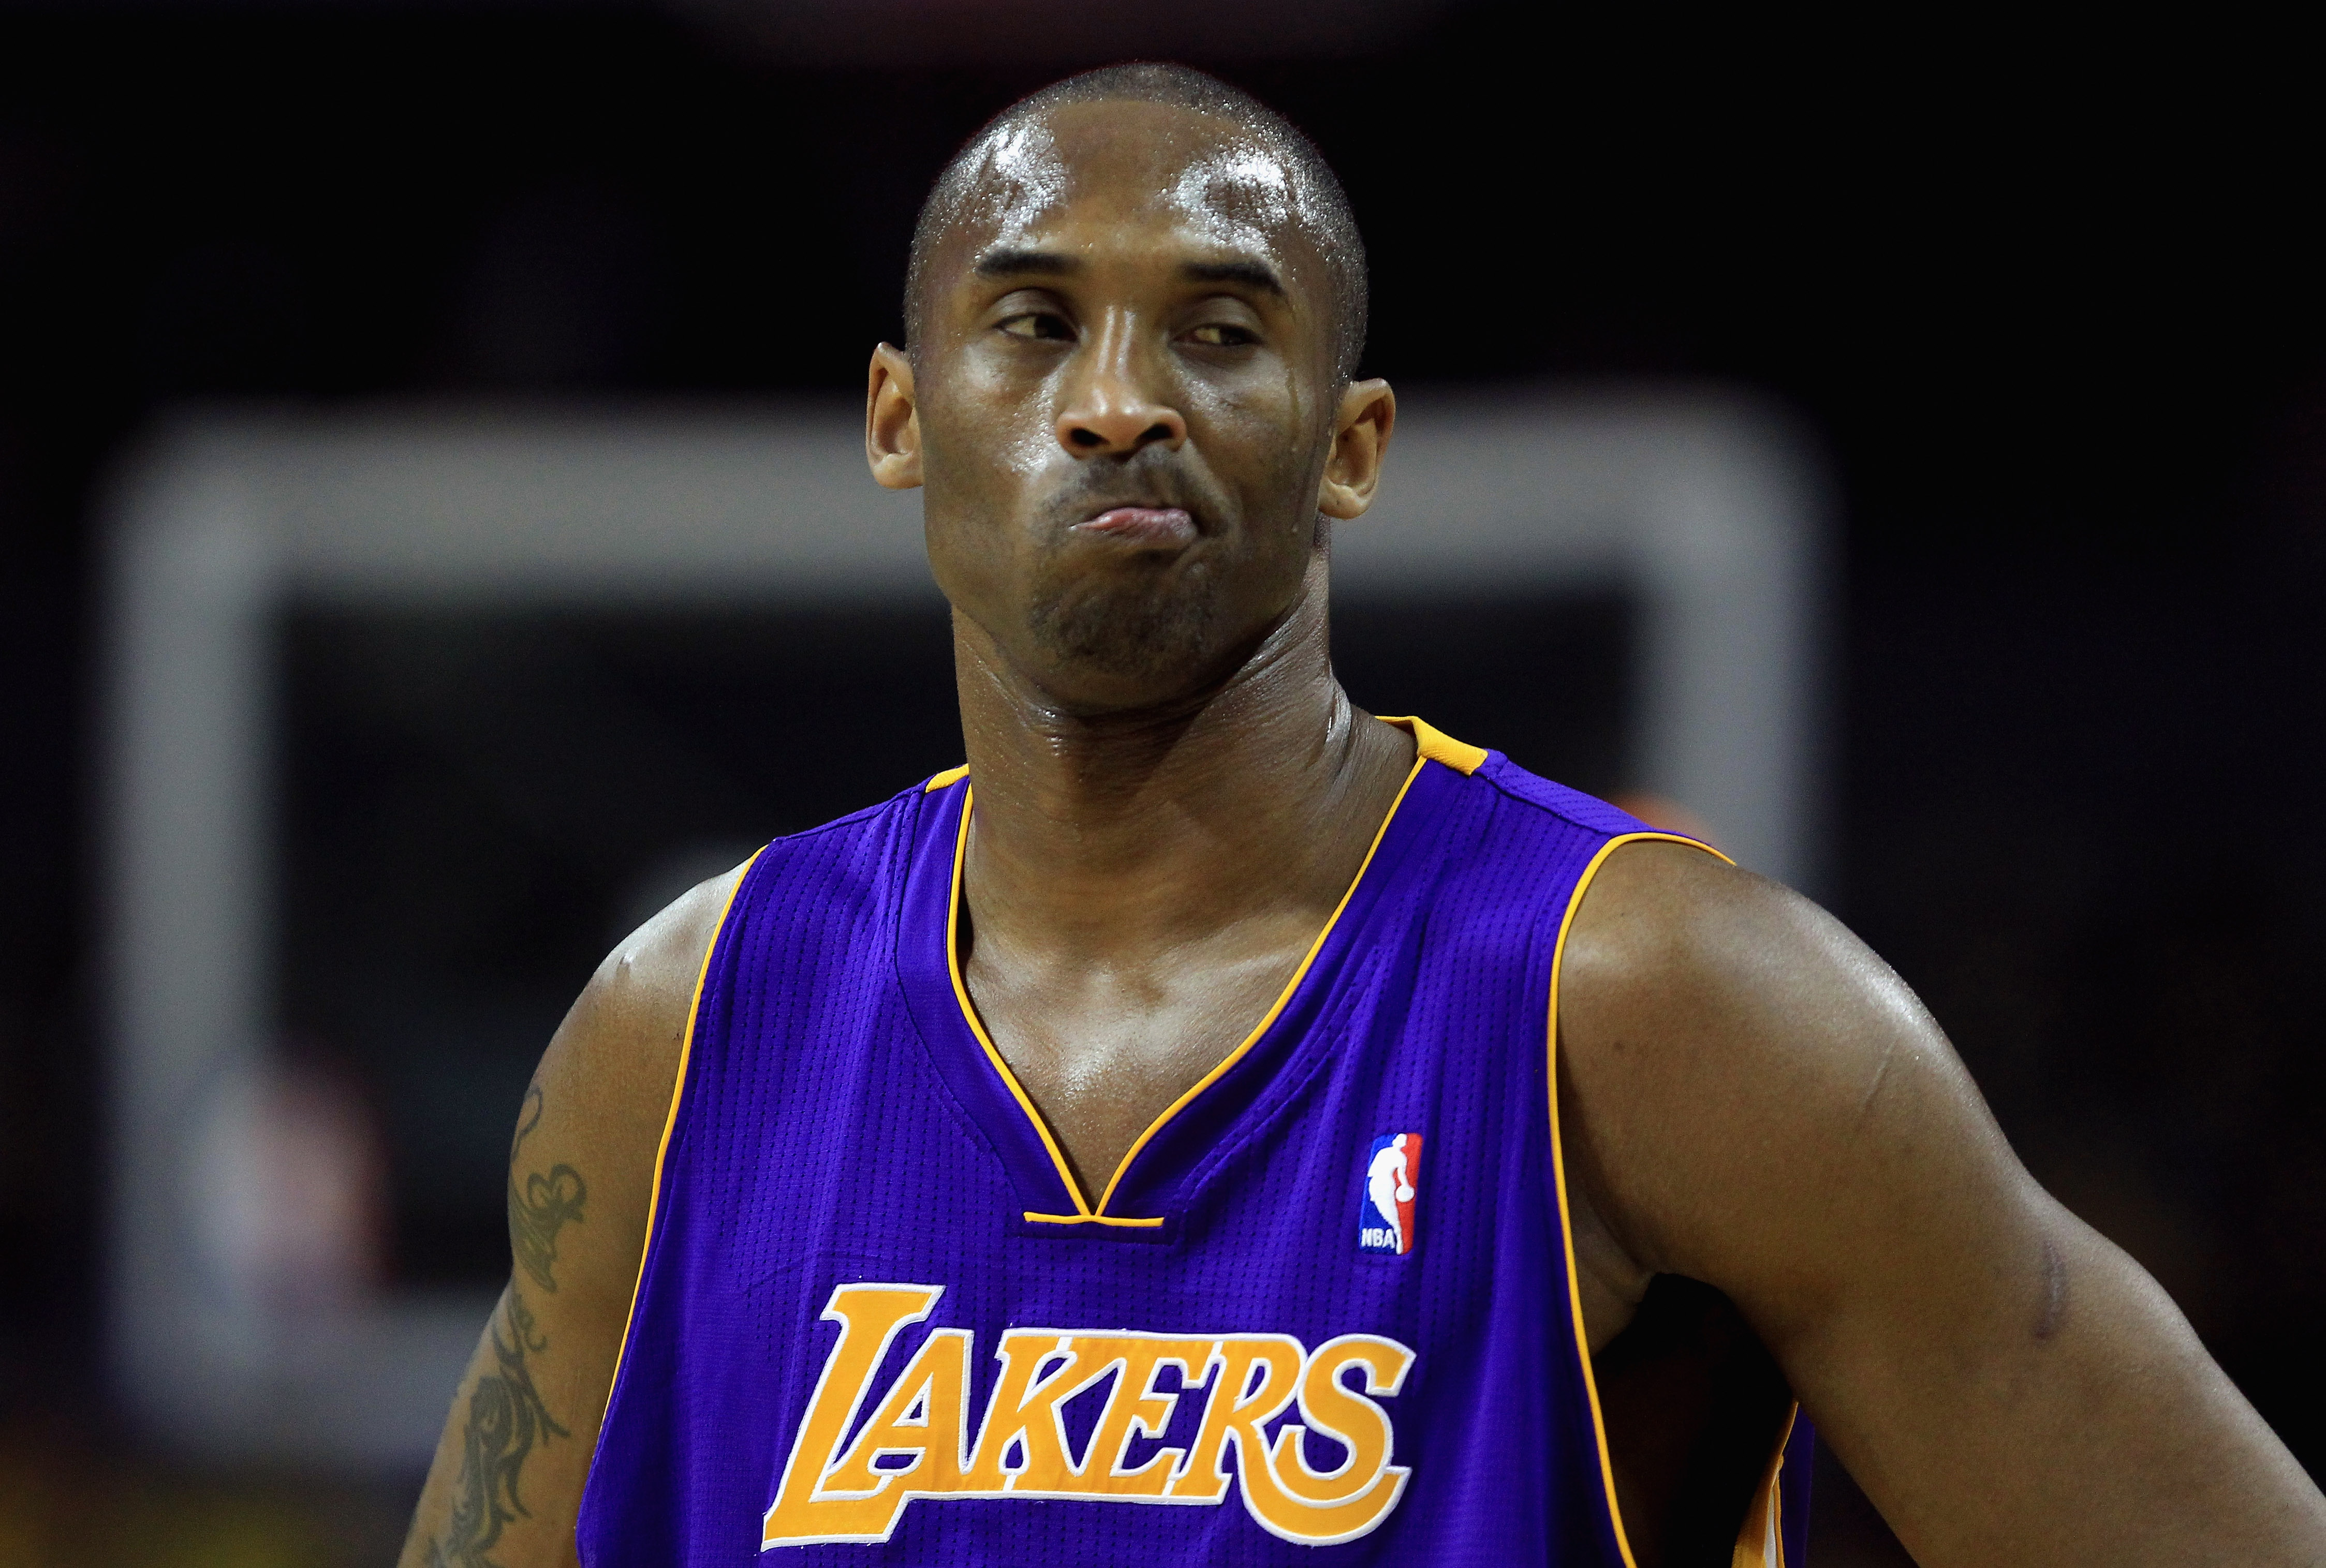 CHARLOTTE, NC - FEBRUARY 14:  Kobe Bryant #24 of the Los Angeles Lakers reacts to the bench against the Charlotte Bobcats during their game at Time Warner Cable Arena on February 14, 2011 in Charlotte, North Carolina. NOTE TO USER: User expressly acknowle